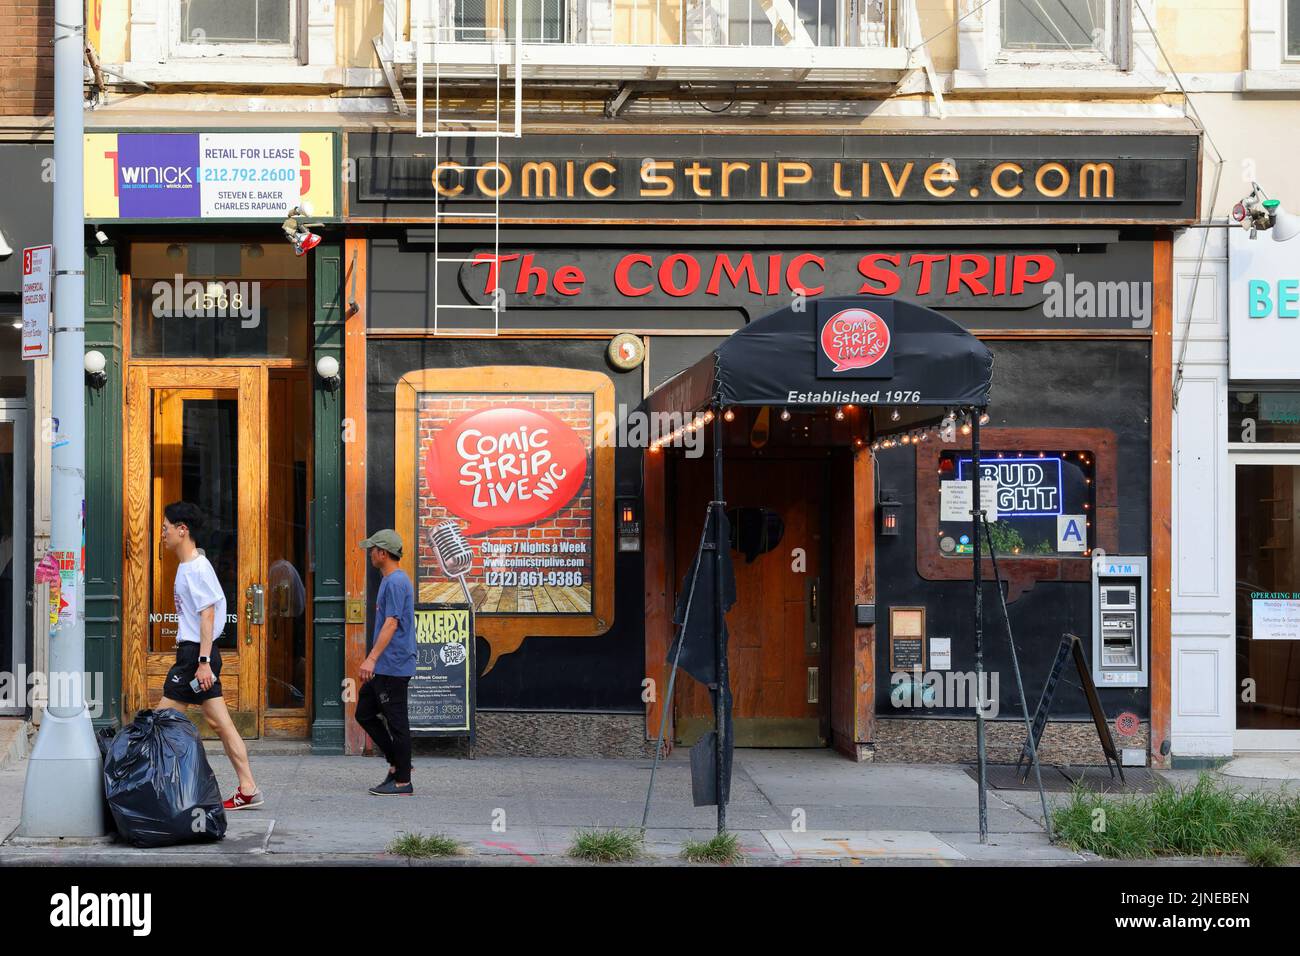 Comic Strip Live, 1568 2nd Ave, New York, NYC storefront photo of a comedy club in the Upper East Side neighborhood in Manhattan. Stock Photo